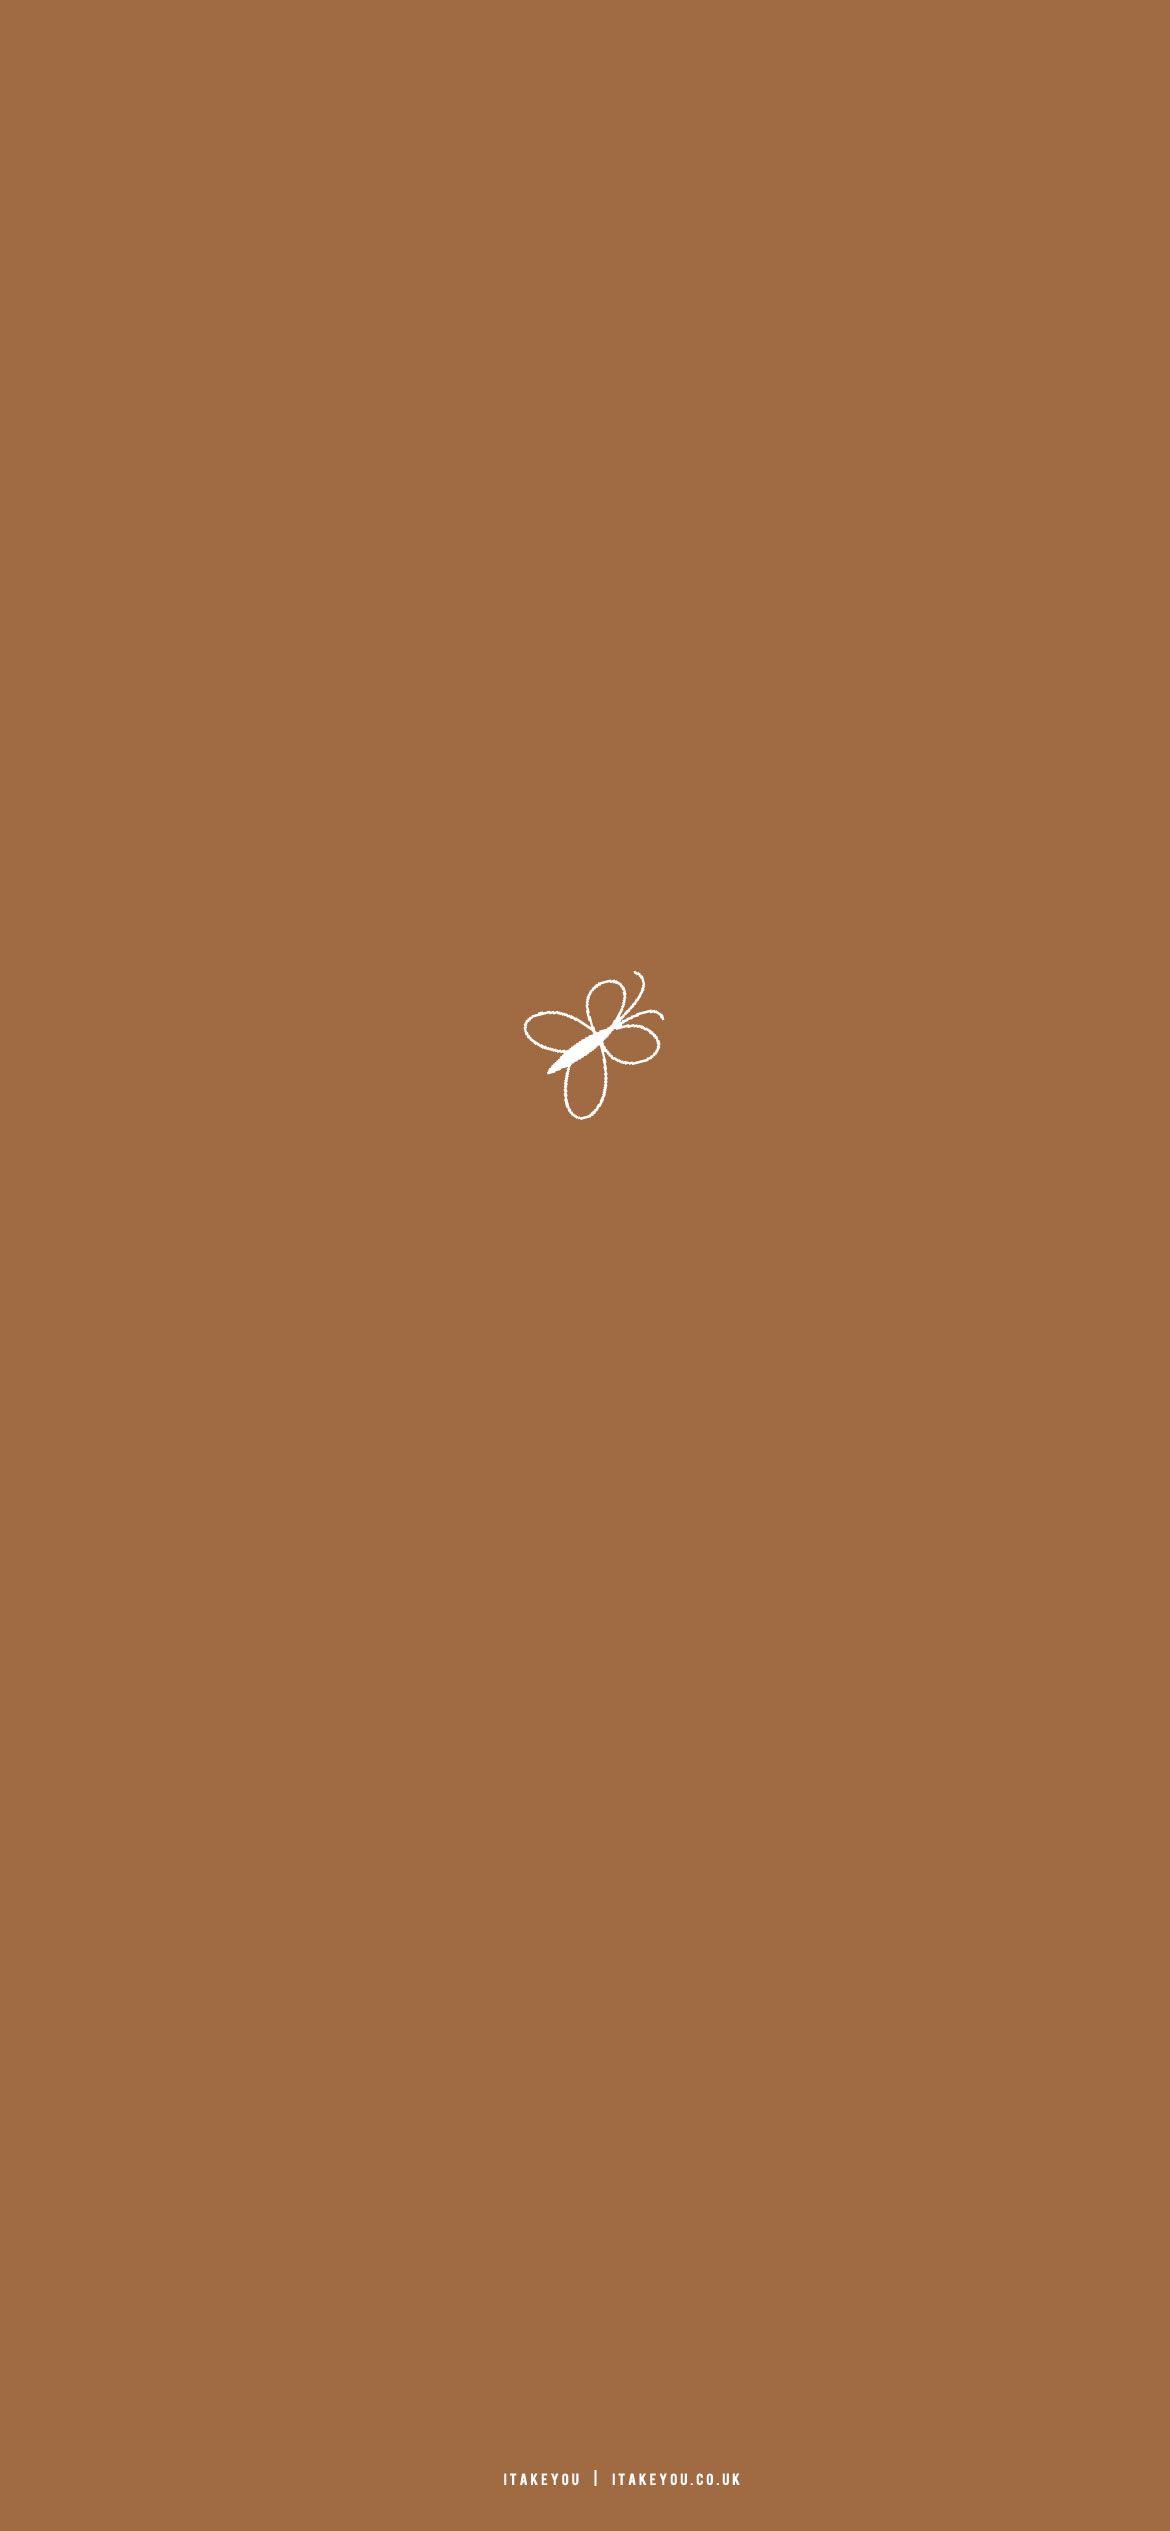 20 Minimalist Brown Wallpaper iPhone Ideas for iPhone Butterfly